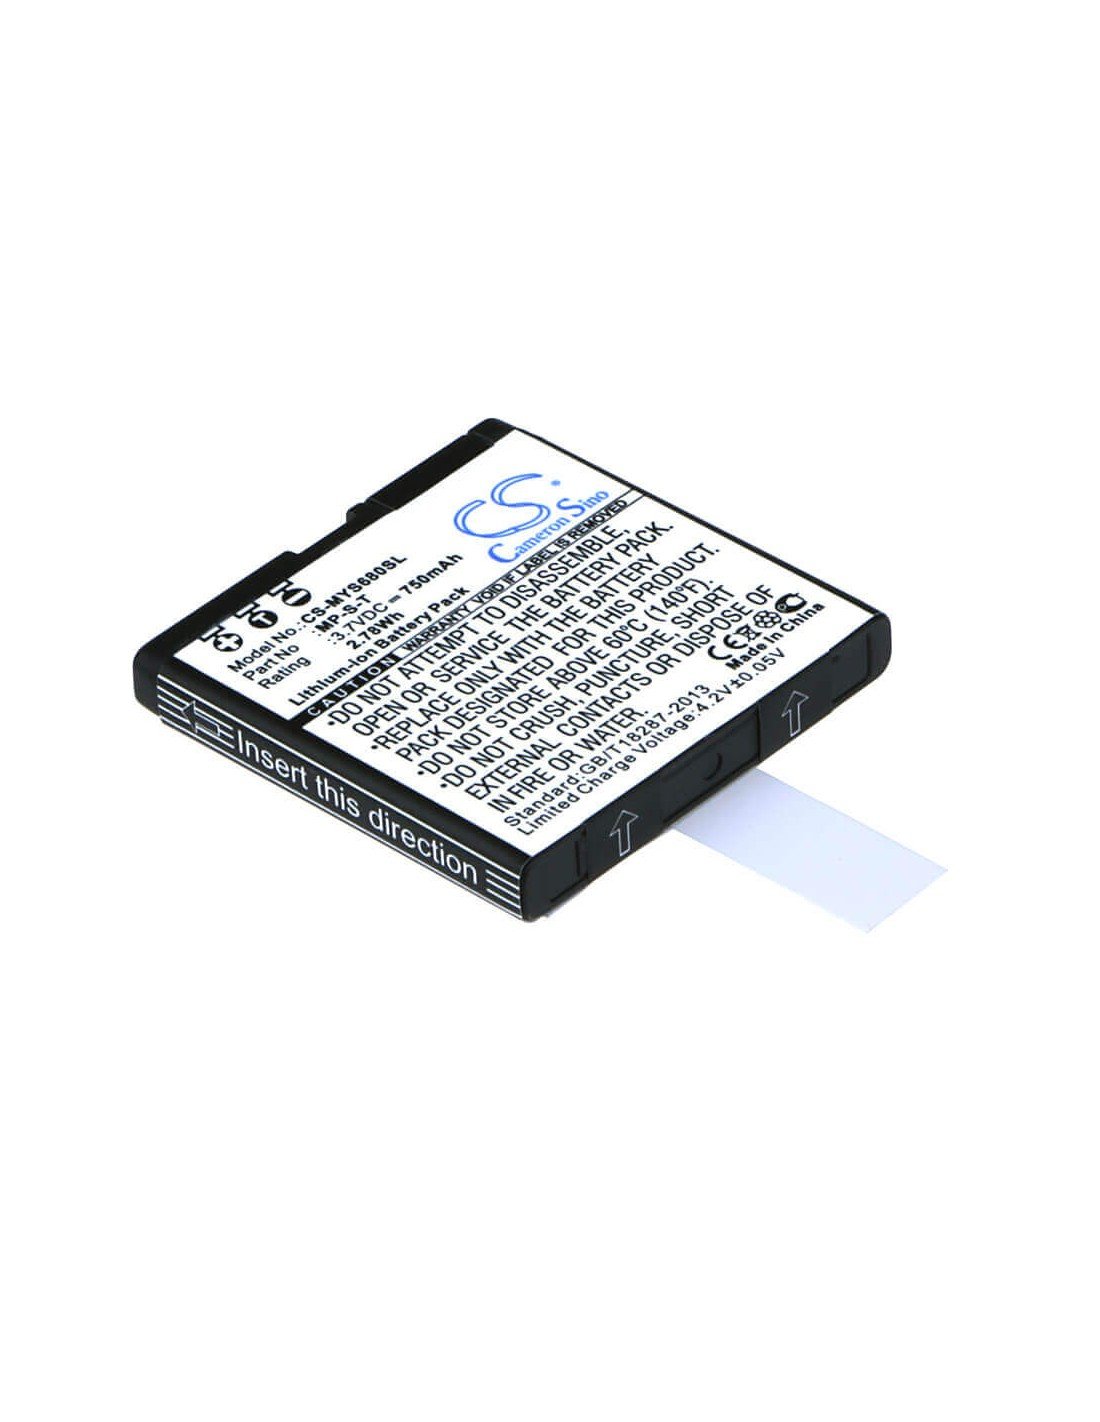 Battery for myPhone 6680 Share, 6600, 6600 Free 3.7V, 750mAh - 2.78Wh